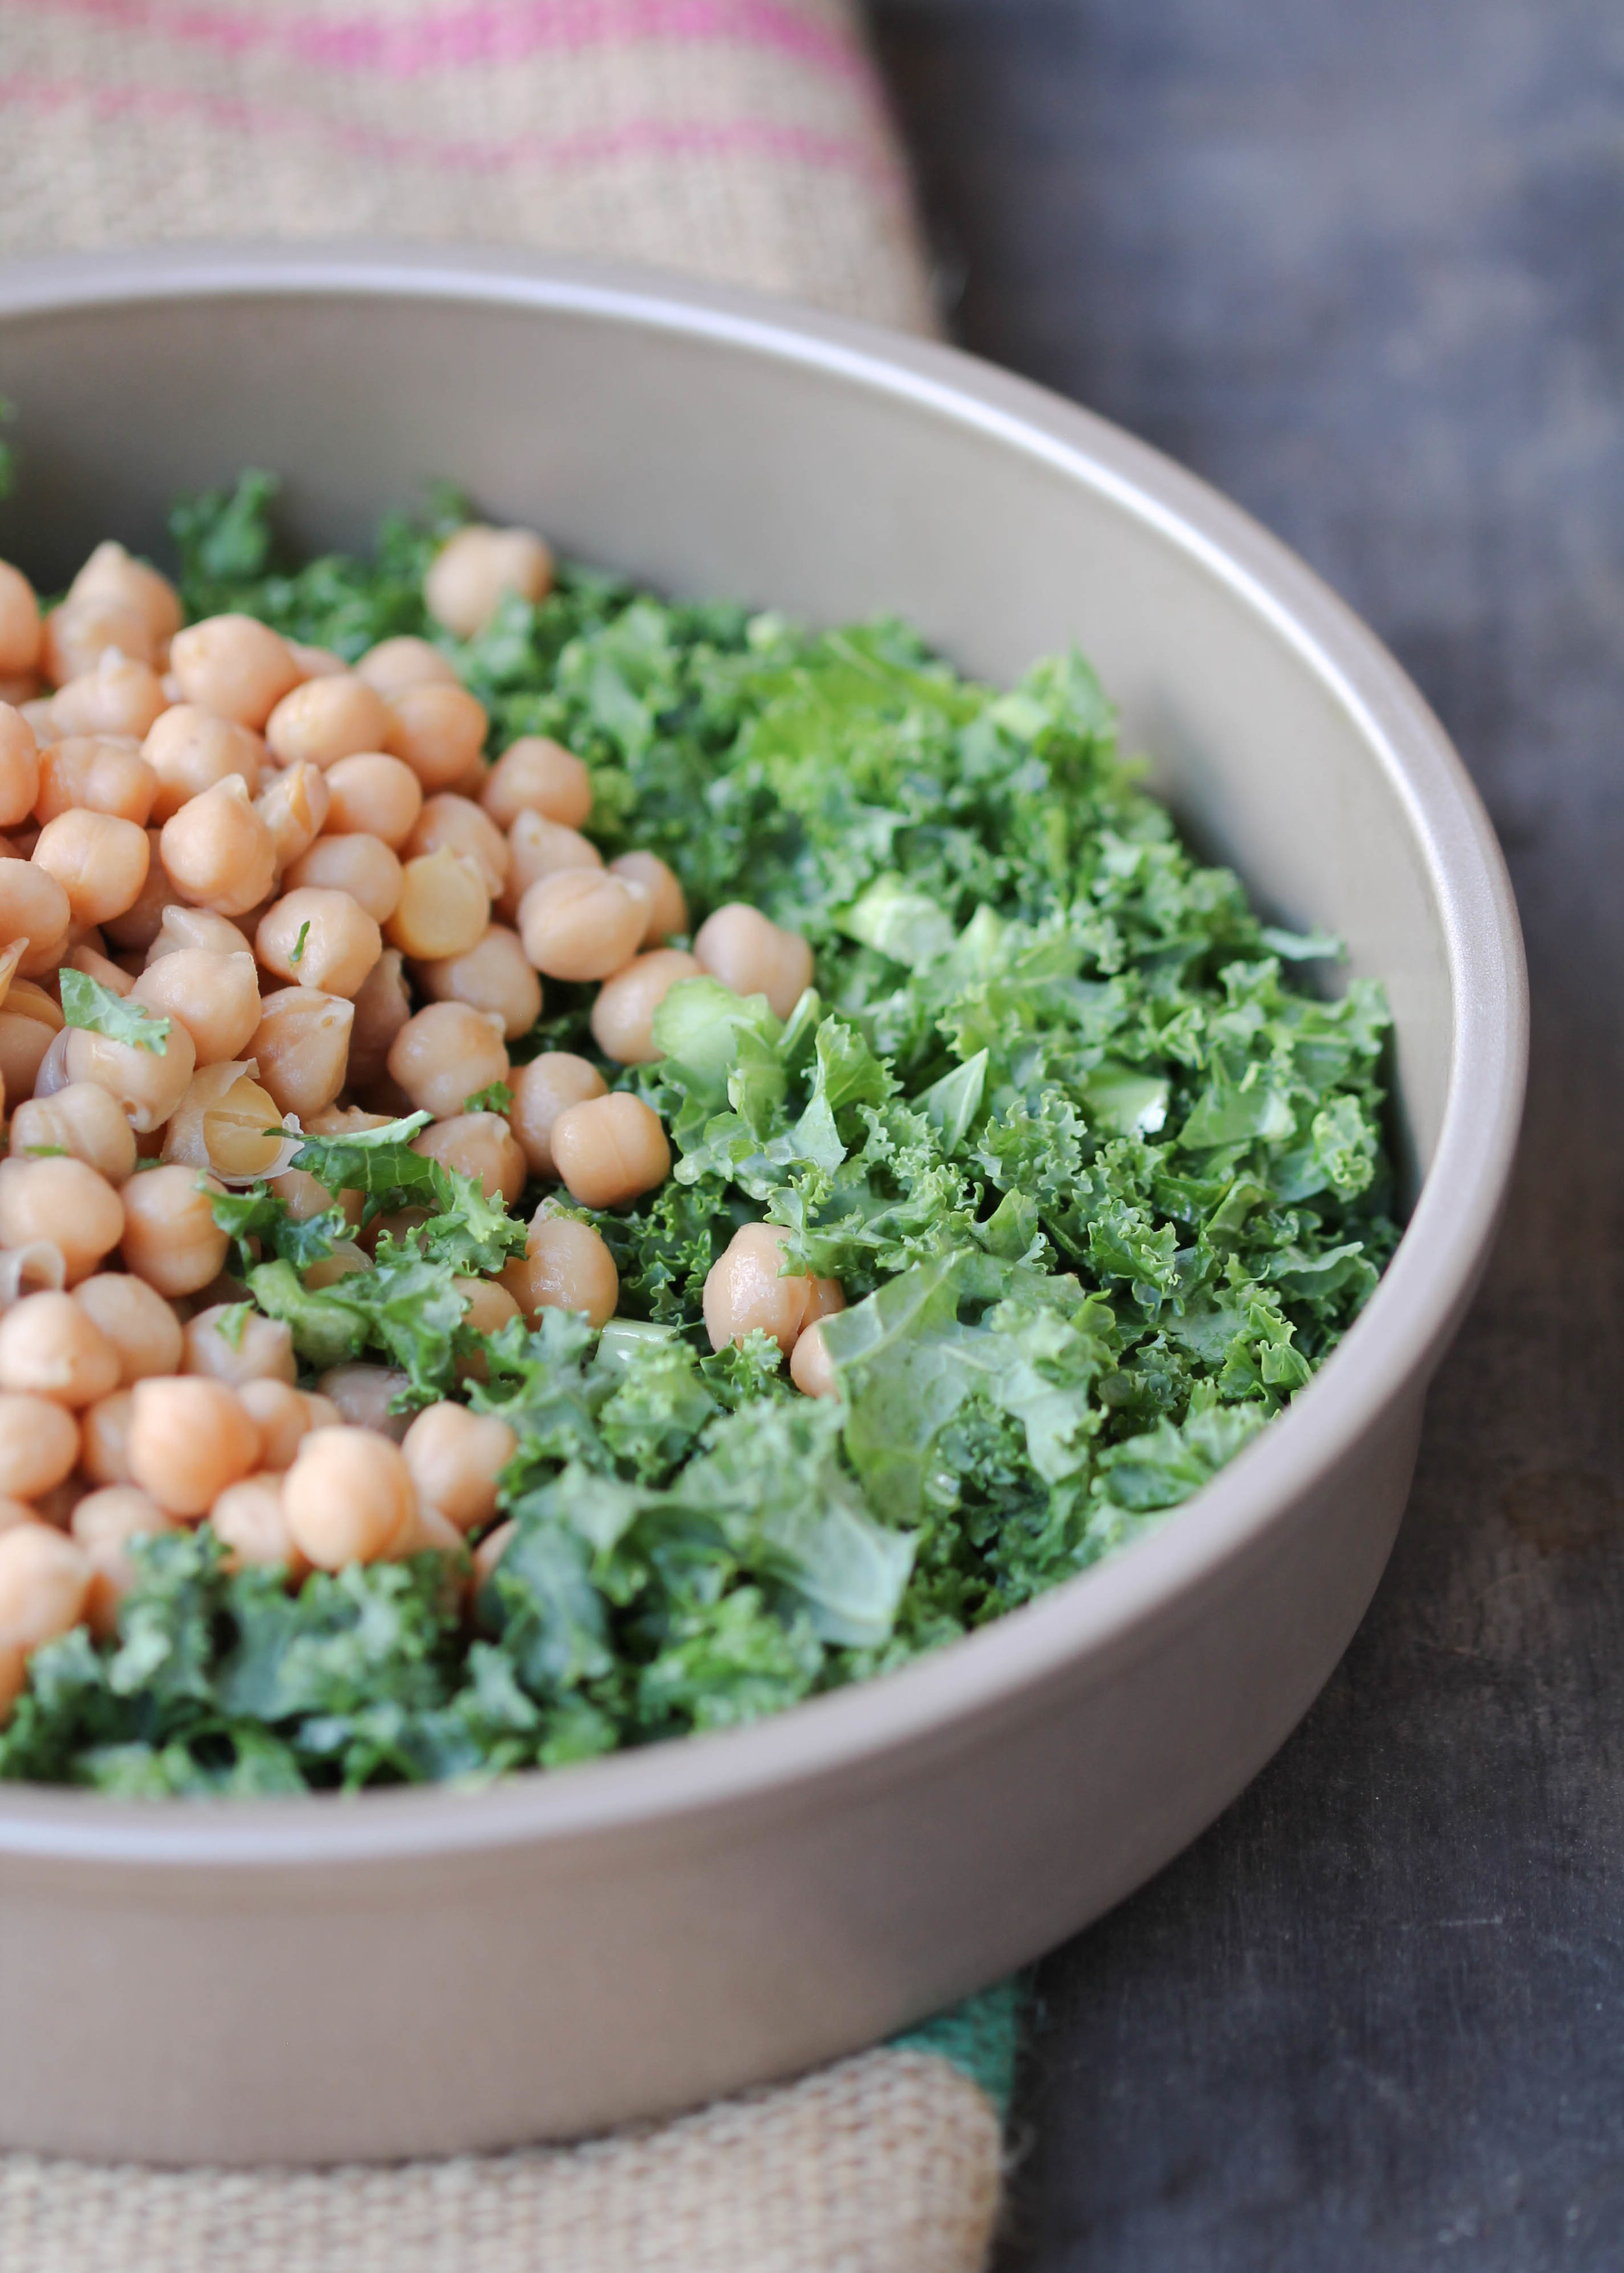 Chopped Kale and Chickpea Salad with Tamarind Vinaigrette is a sturdy, nutritious salad that packs well for lunch/picnic! It is naturally vegan, gluten-free, and allergy friendly as well.